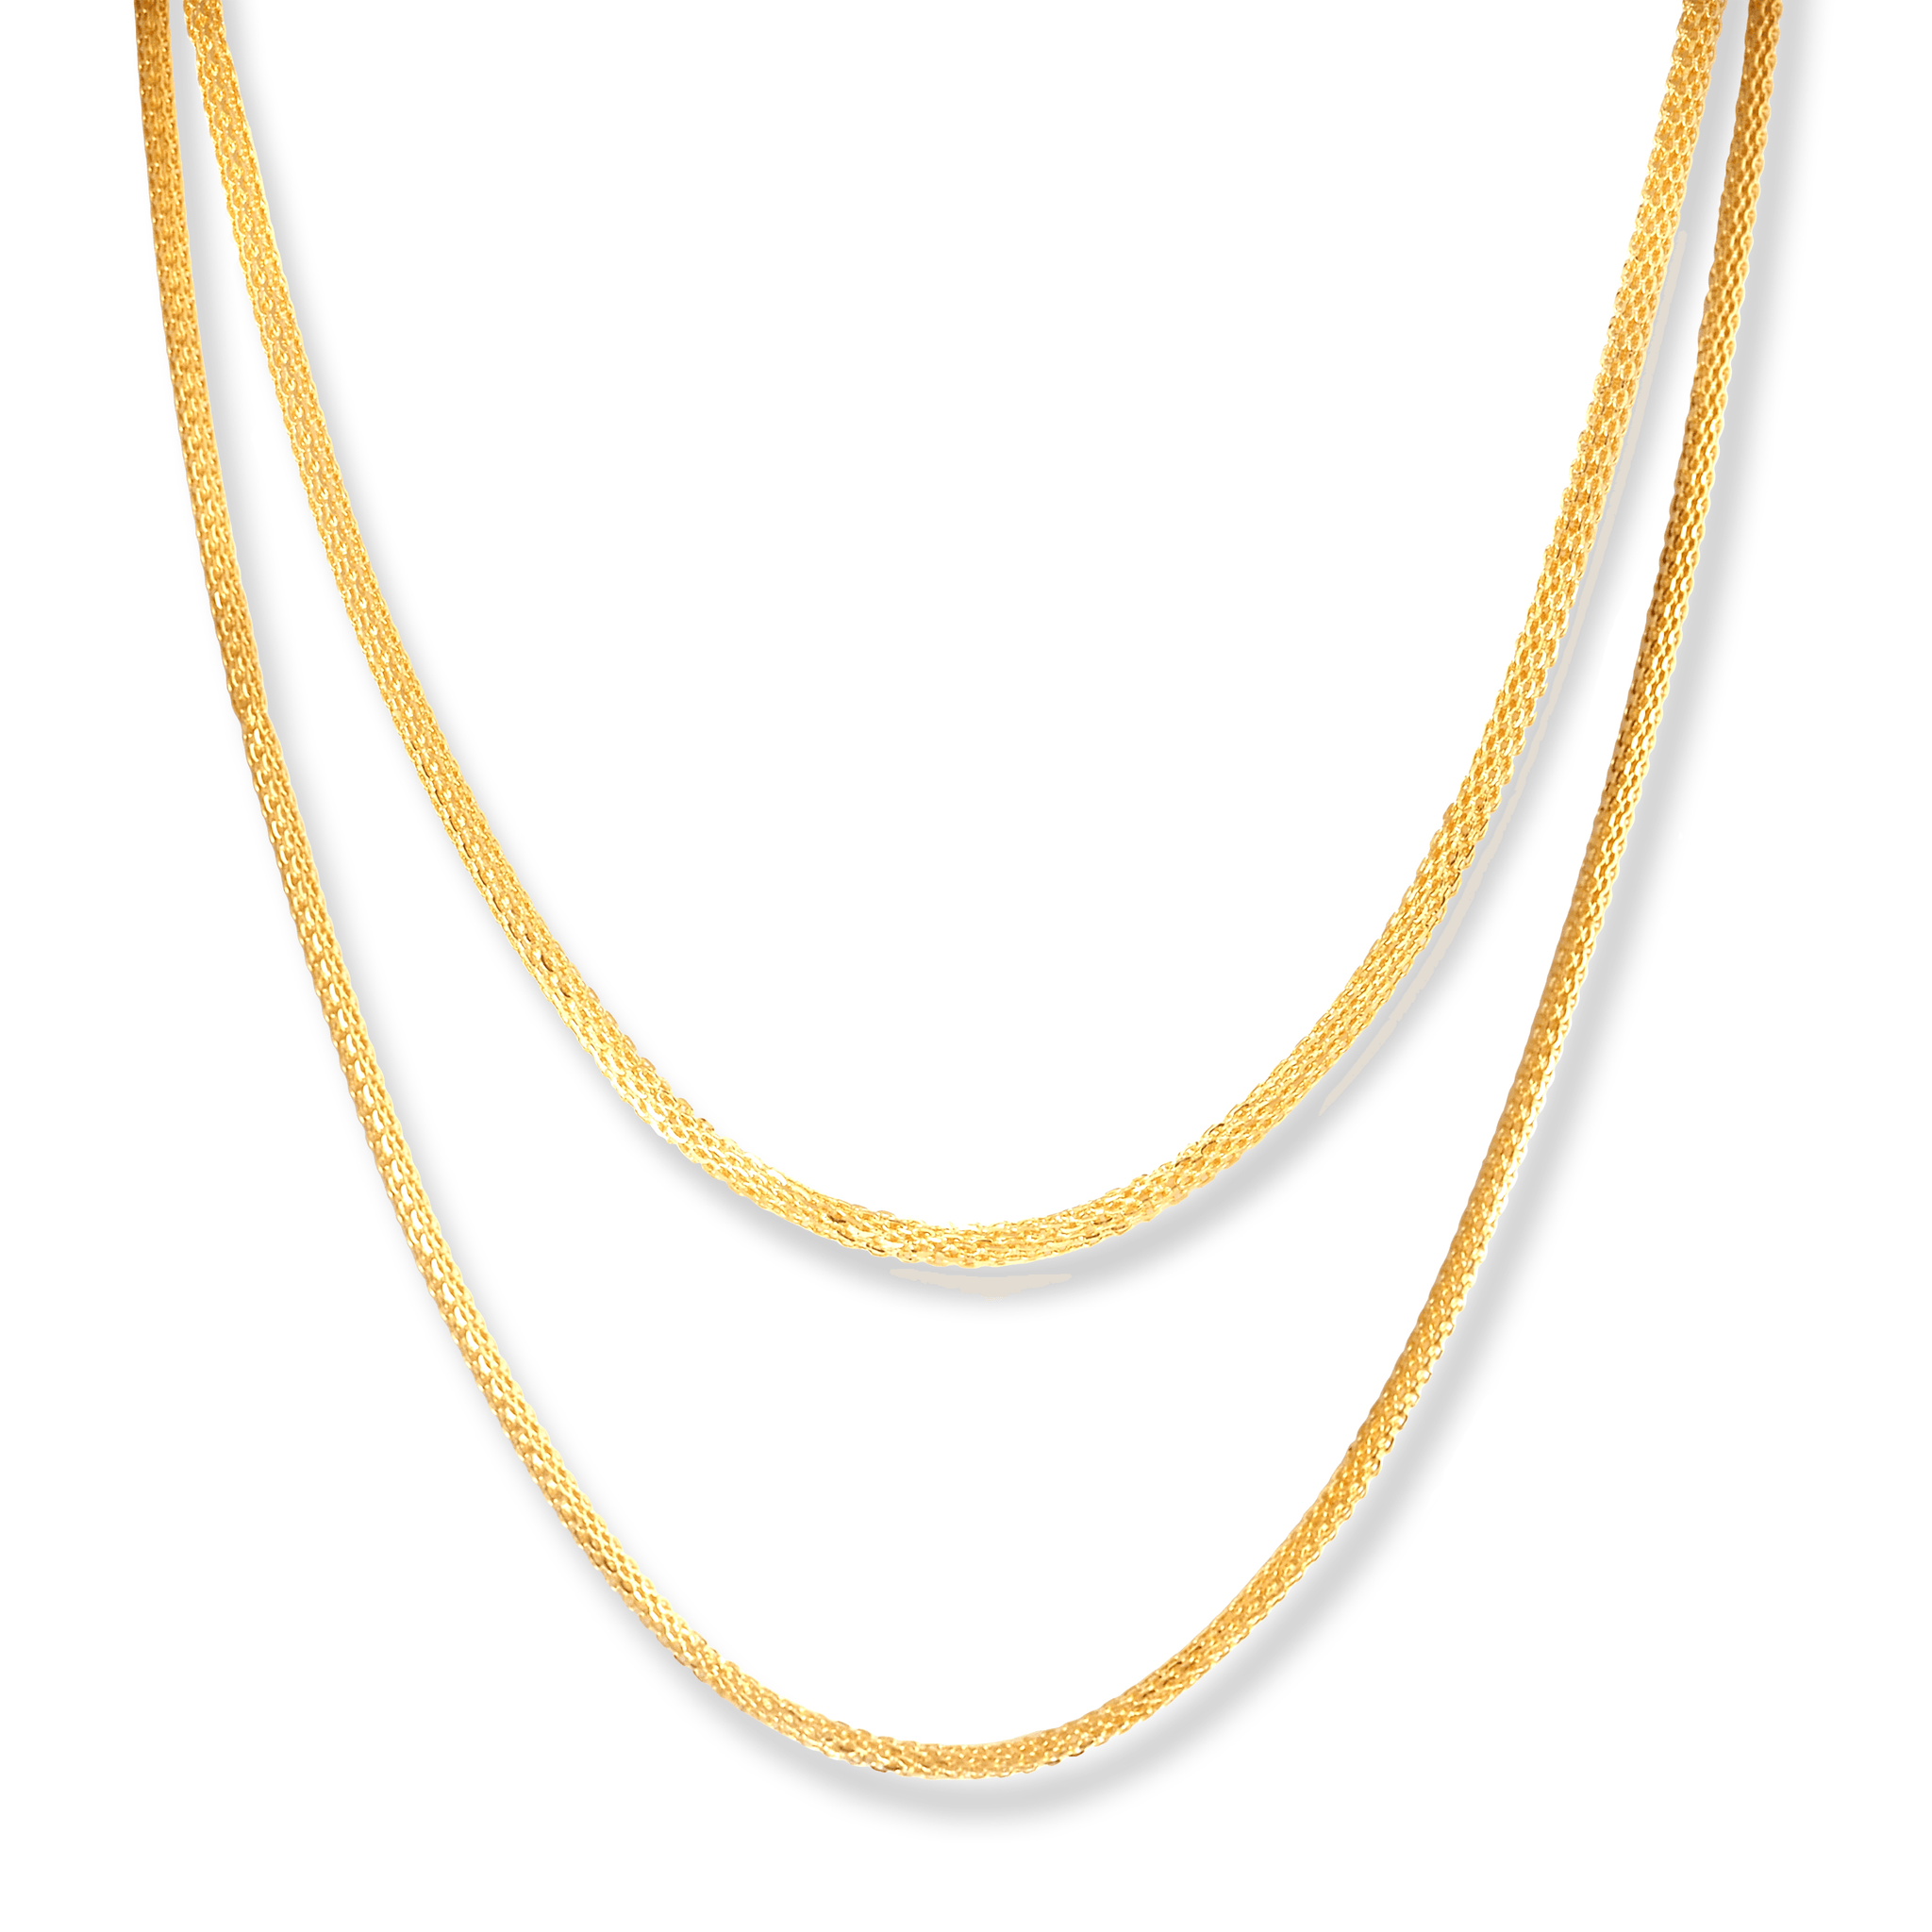 22ct Gold Hollow Milan Chain with Lobster Clasp C-7136